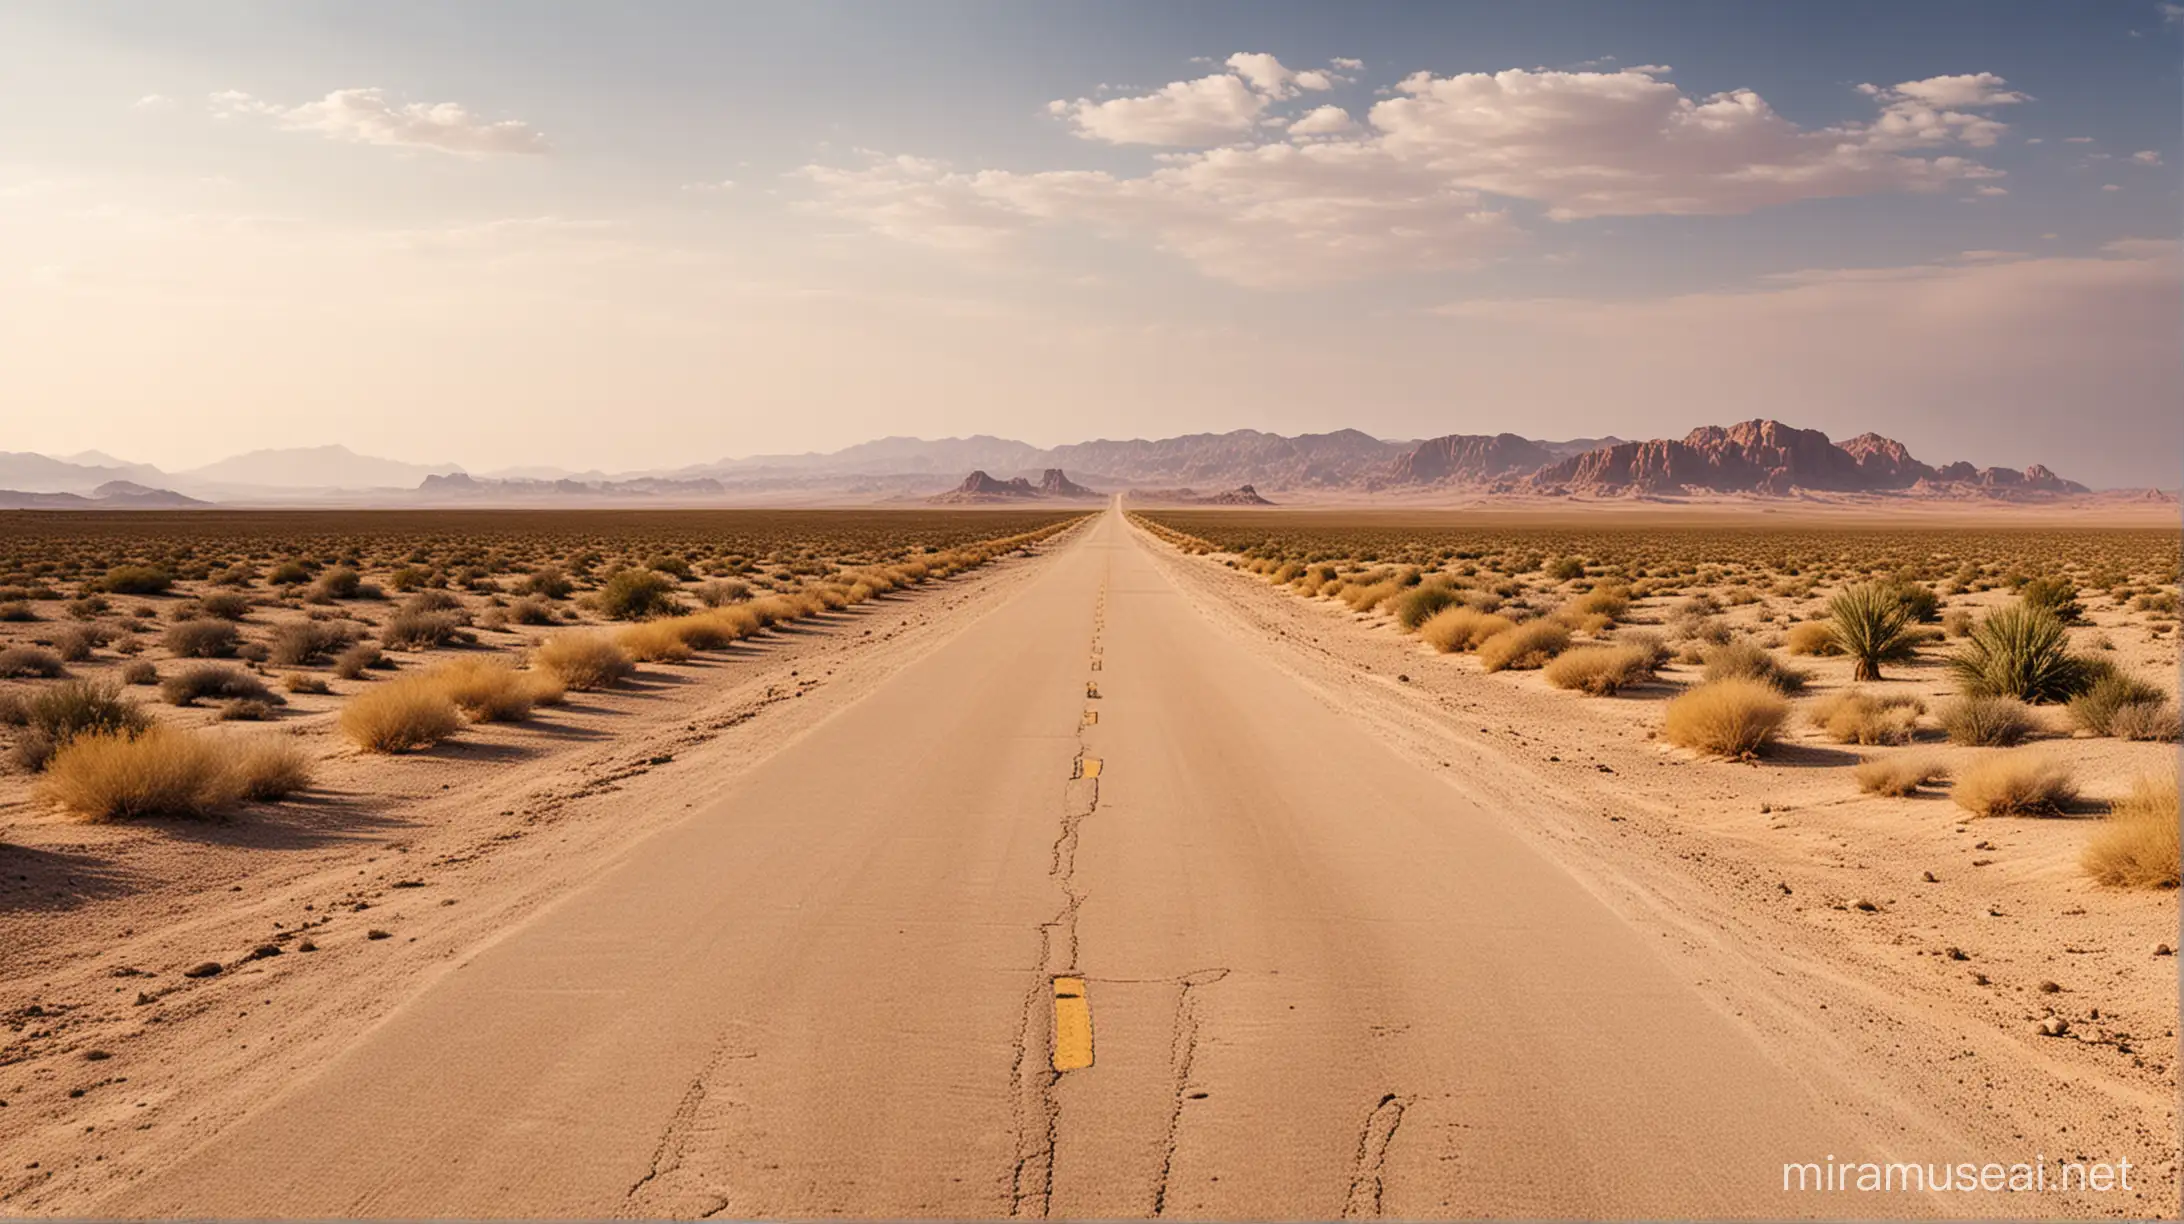 Lonely Road in the Desert Landscape